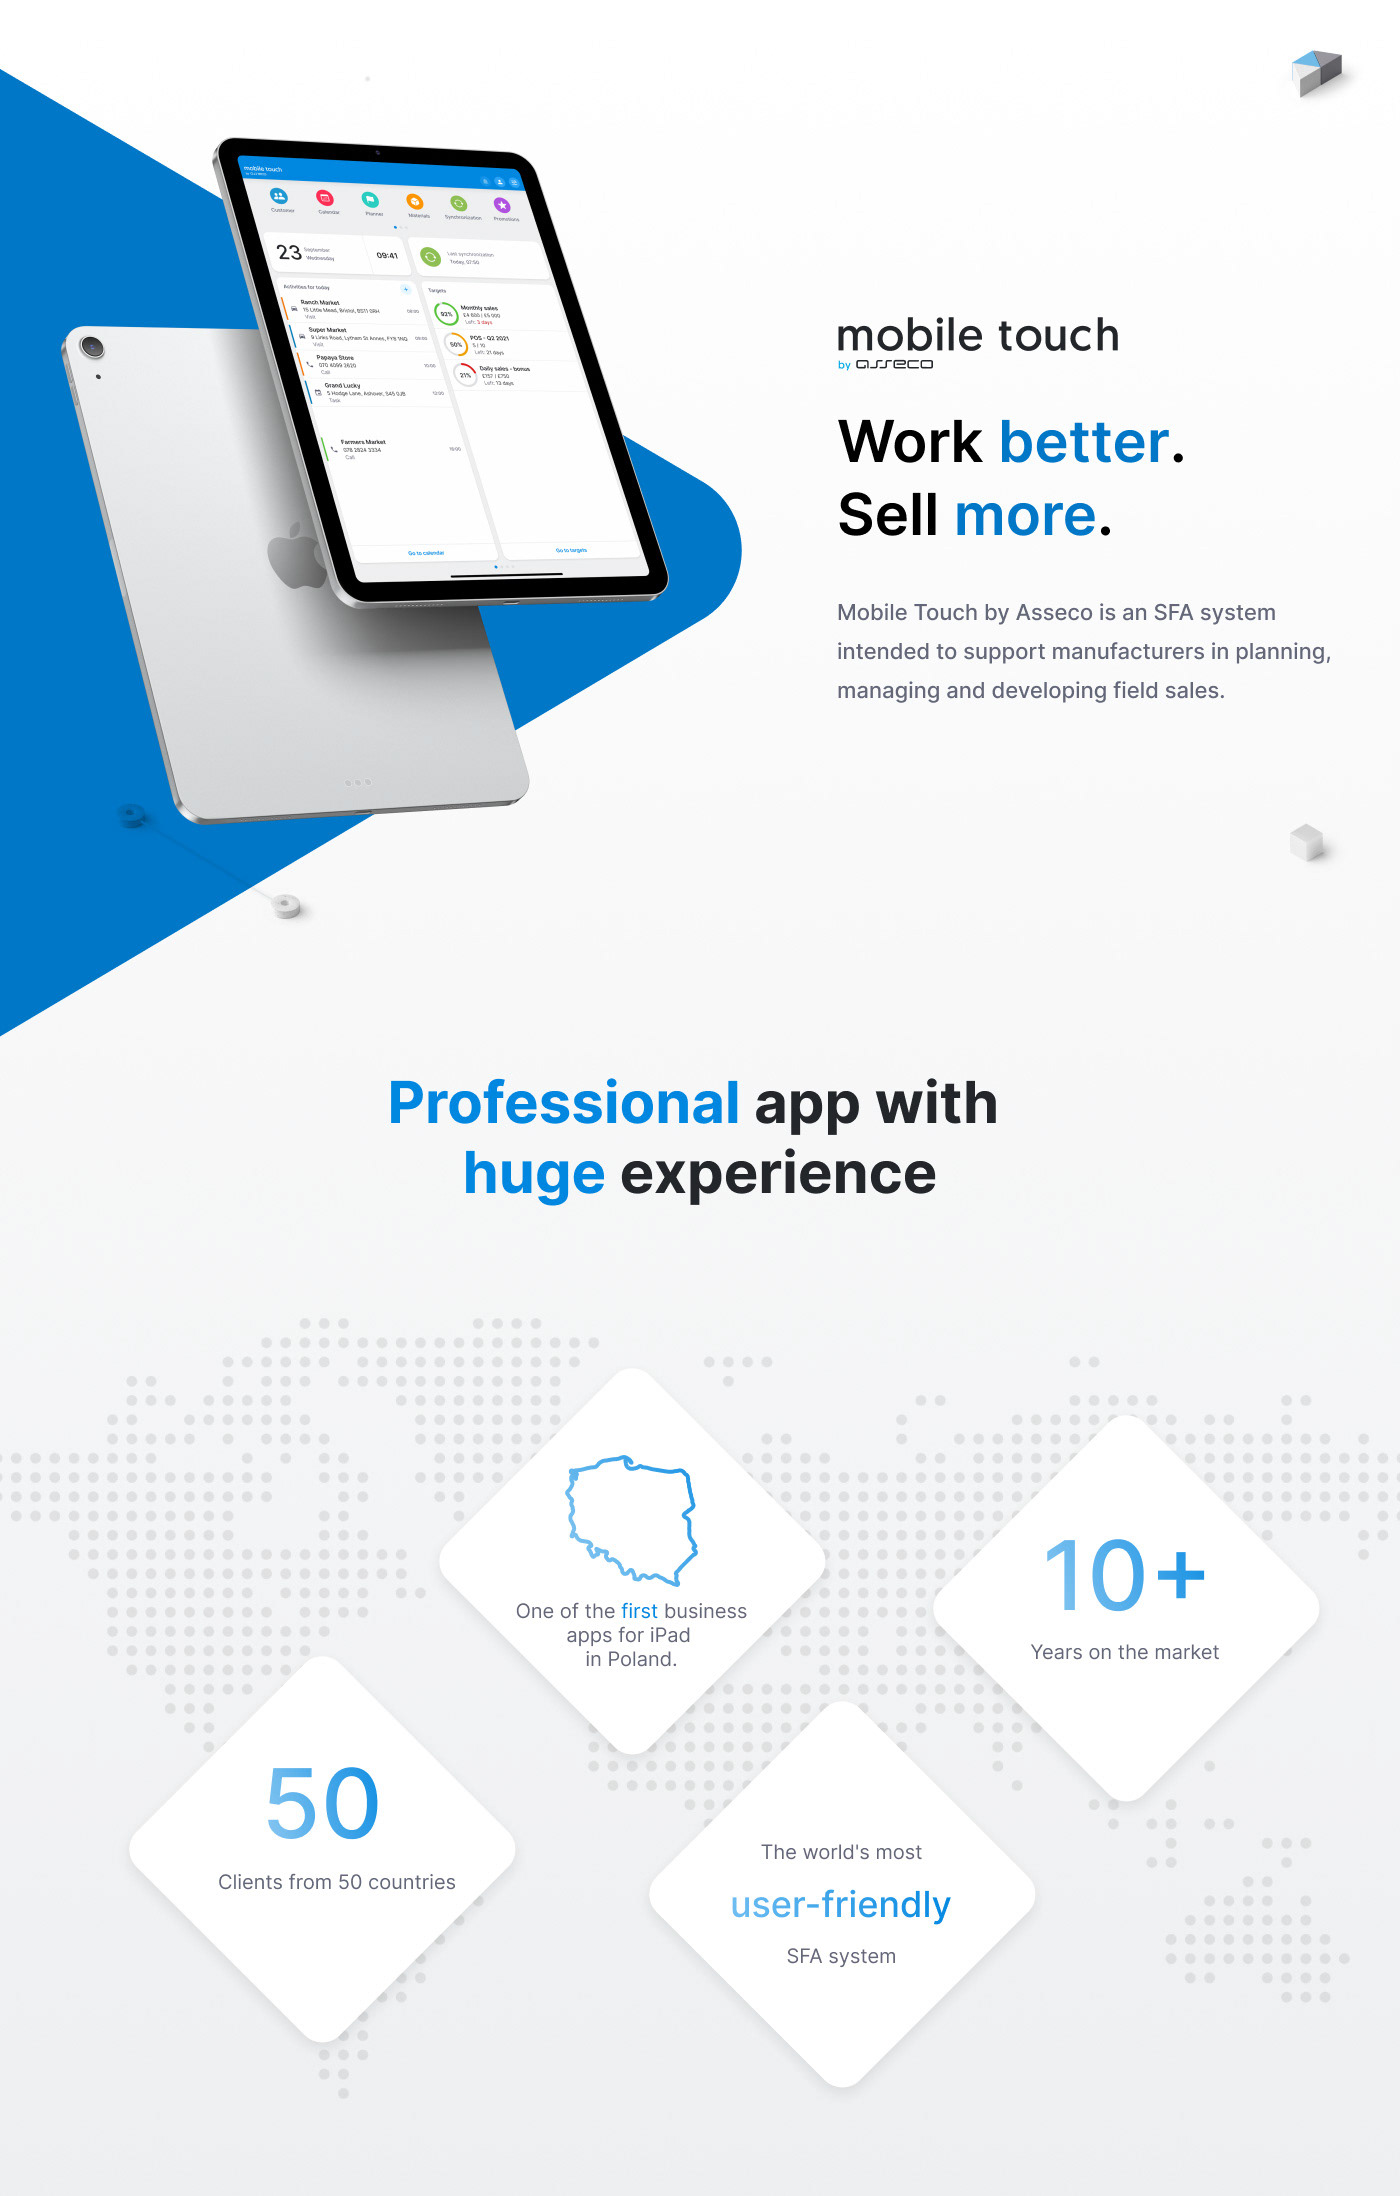 asseco Asseco BS lublin Mobile app Mobile Touch modern app poland Retail ux UX UI